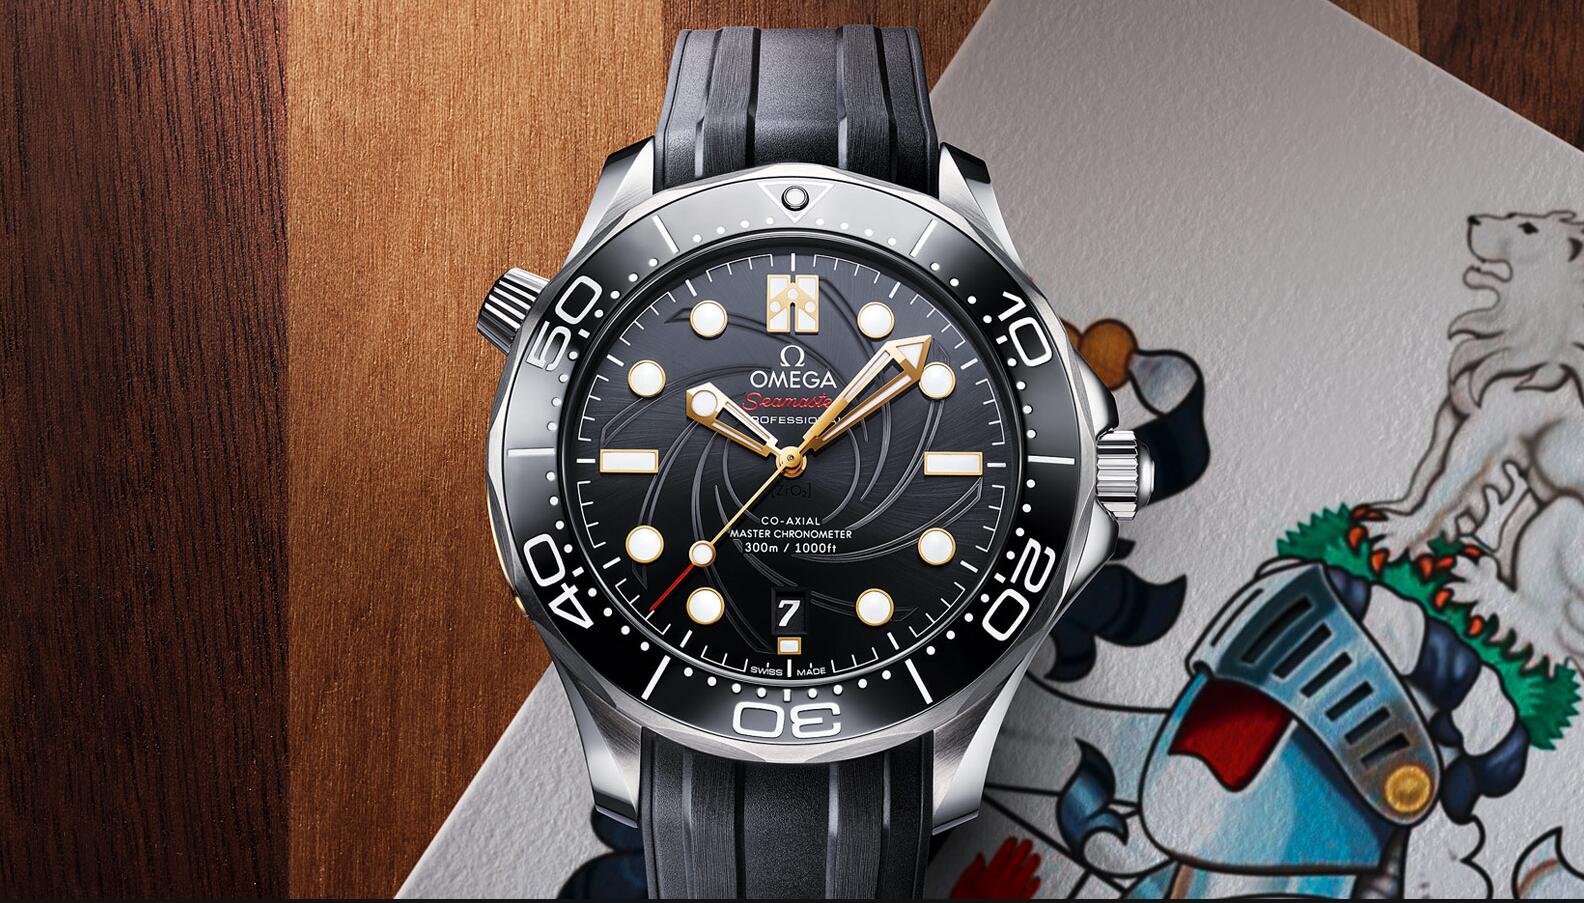 The water resistant copy watches are made from stainless steel.